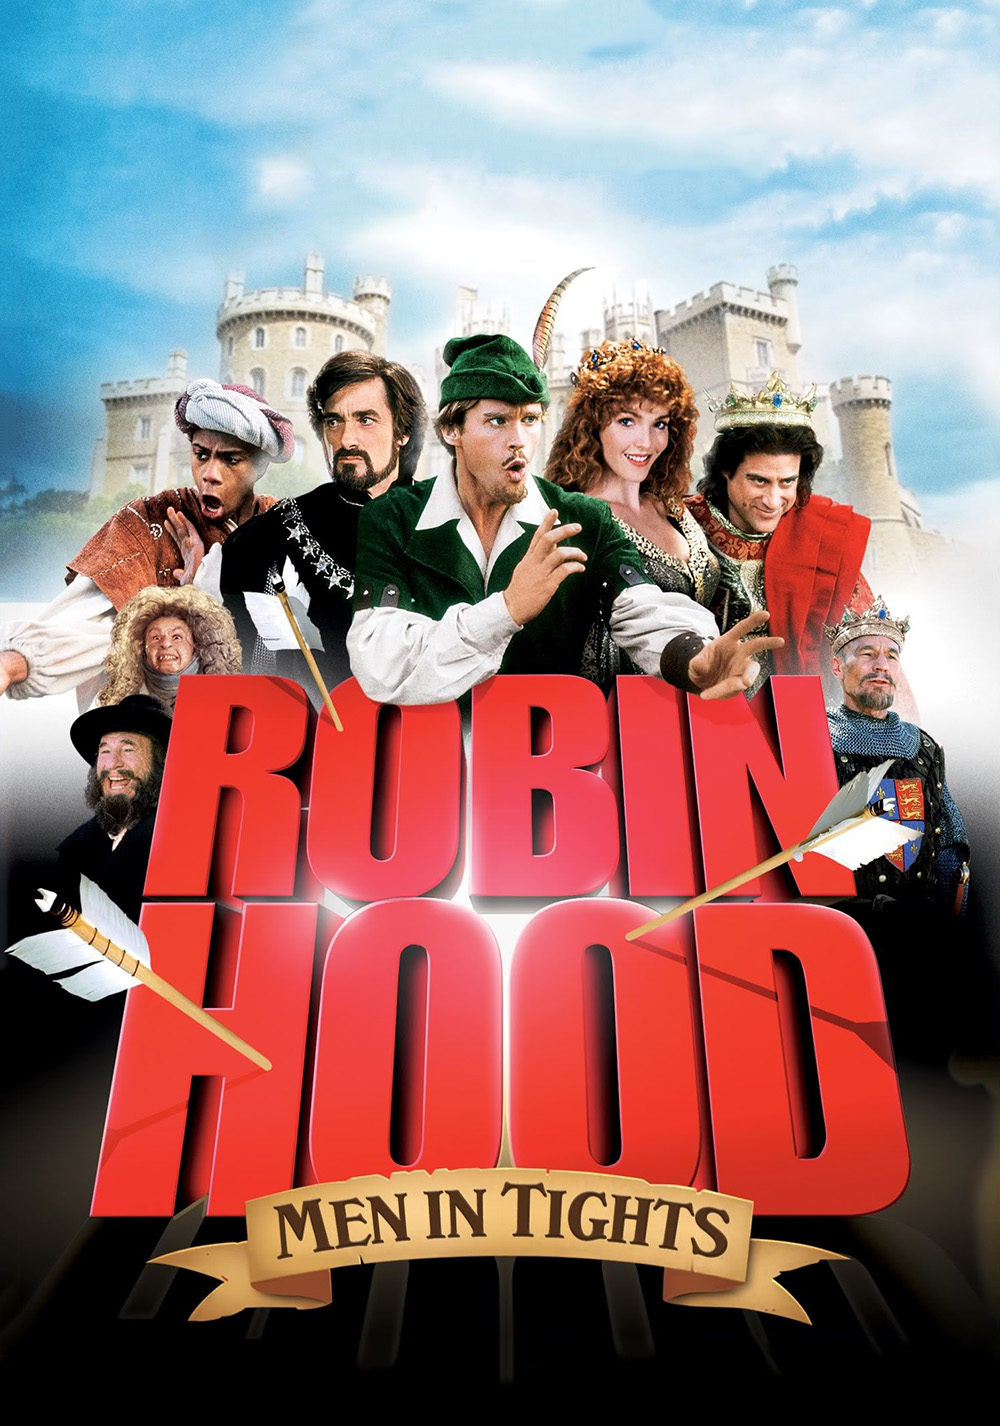 Robin Hood: Men in Tights Picture